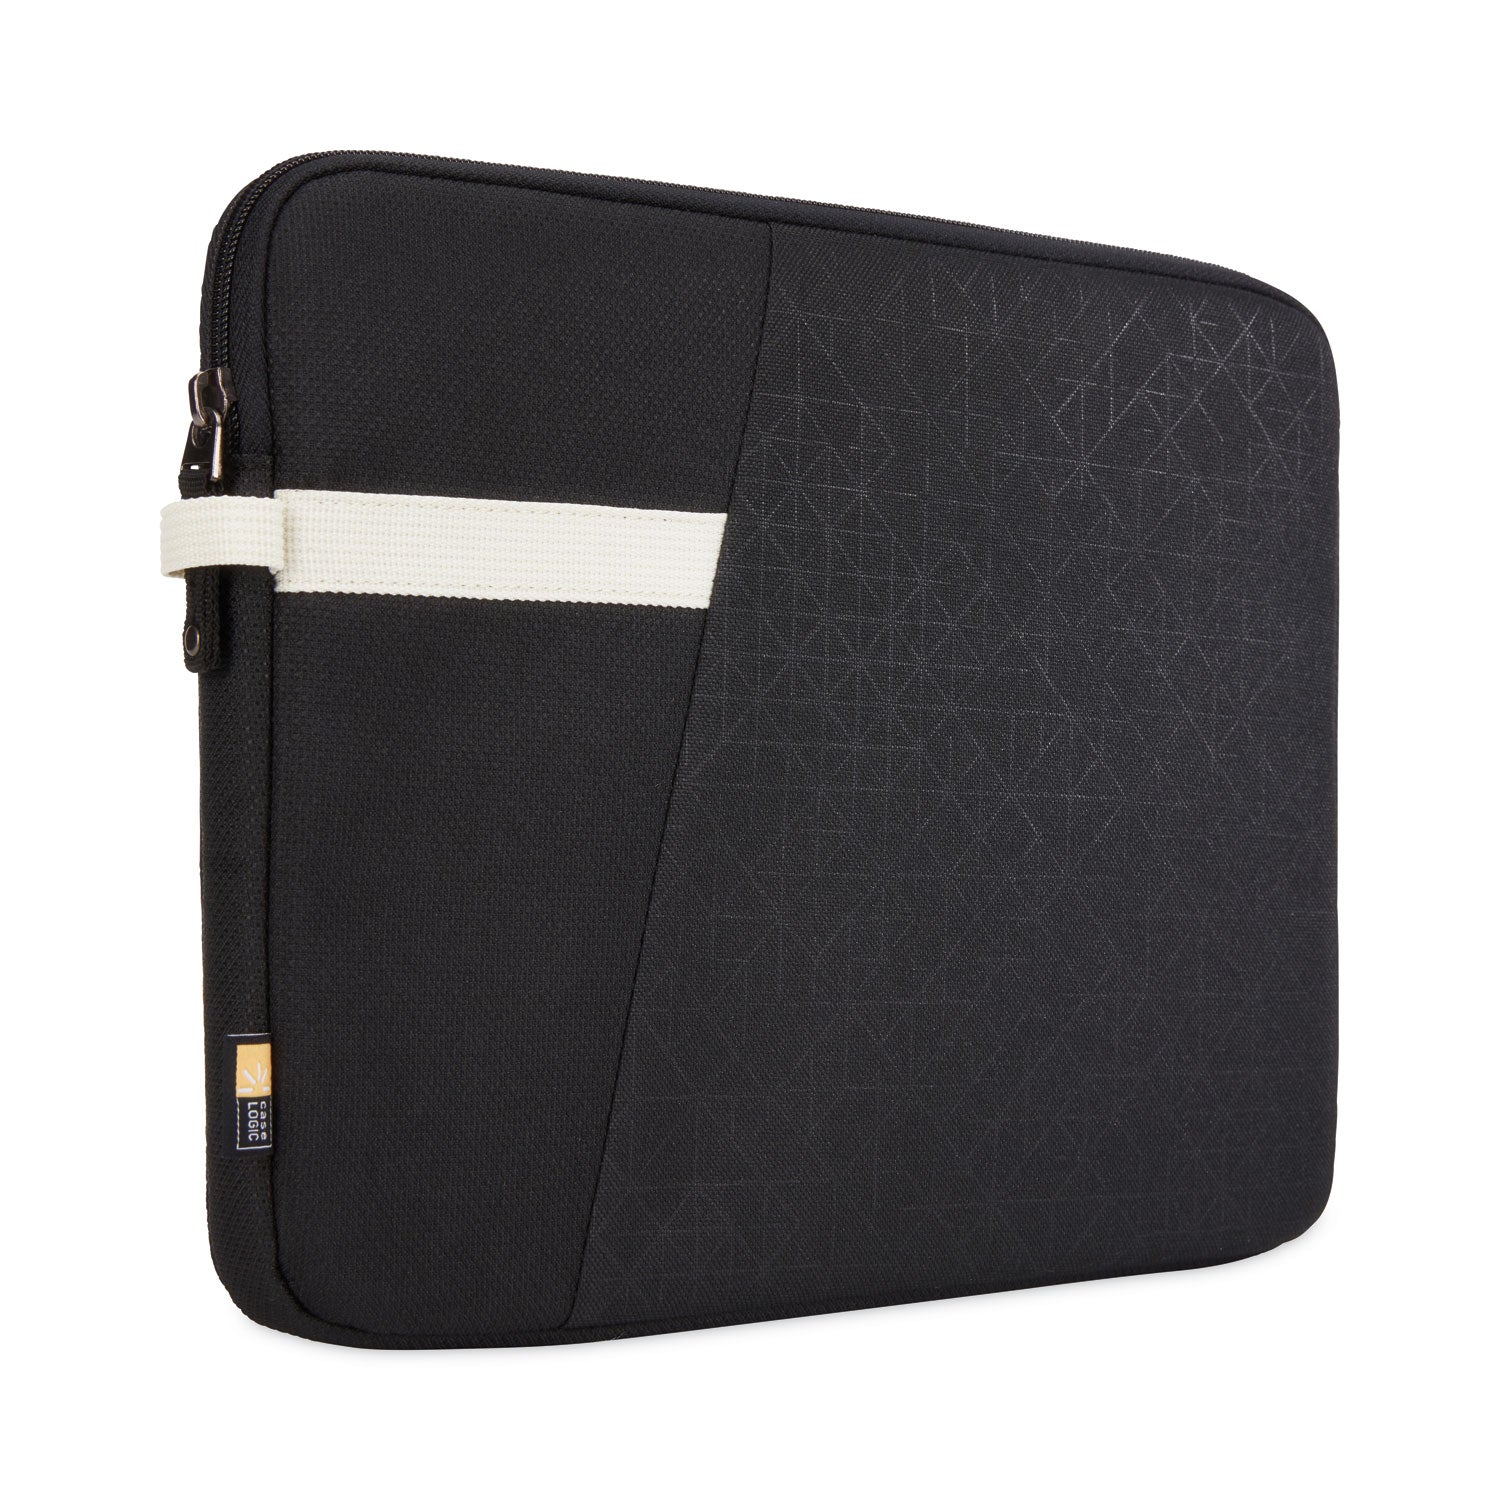 ibira-laptop-sleeve-fits-devices-up-to-116-polyester-126-x-12-x-94-black_clg3204389 - 2